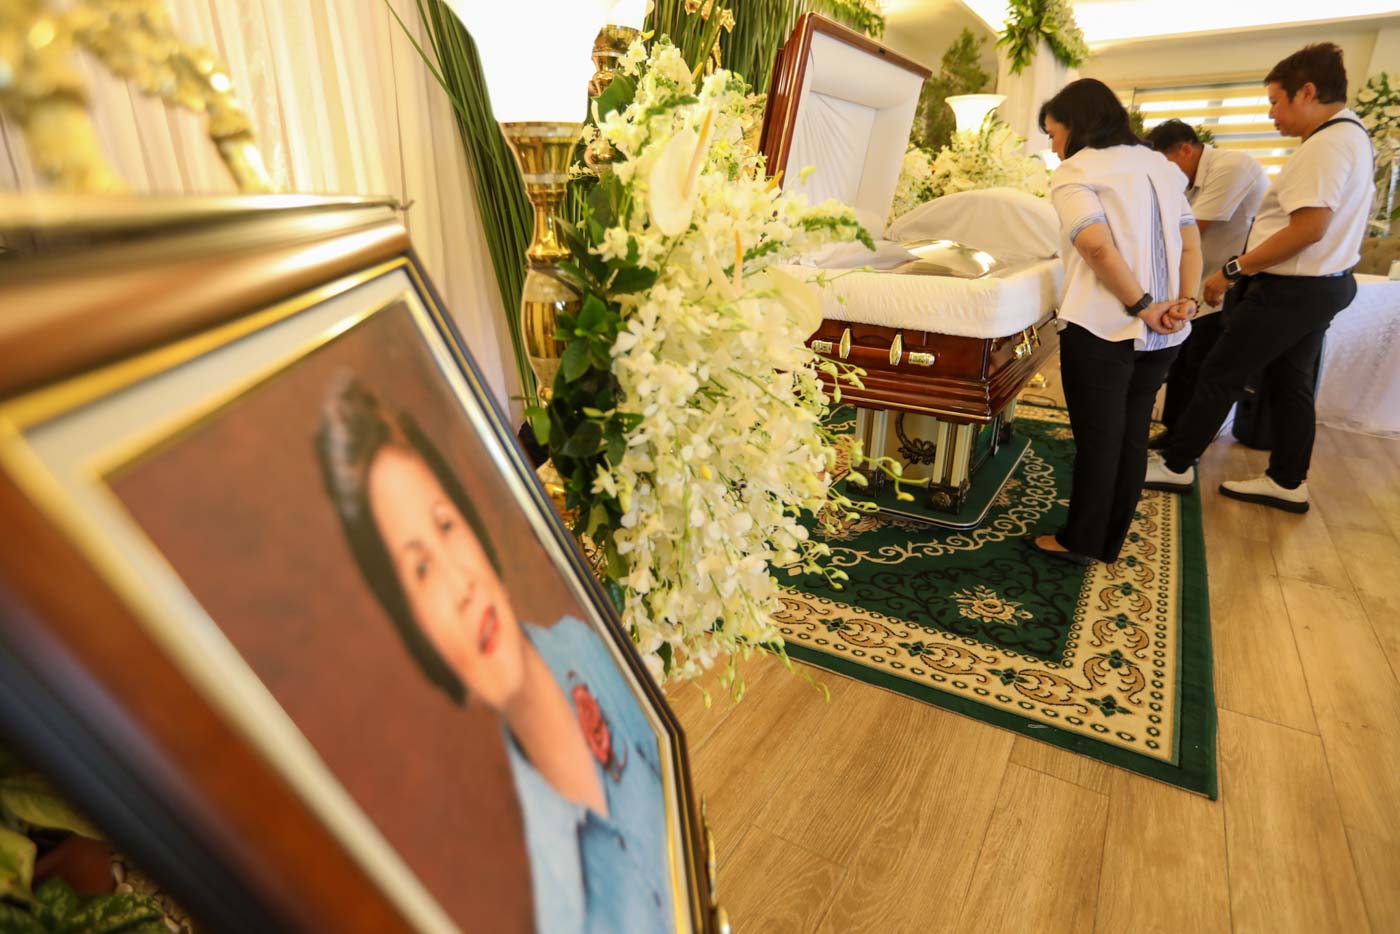 Vice President Leni Robredo's mother, Salvacion Gerona, was laid to rest on Saturday, February 29. Photo by Charlie Villegas/OVP 